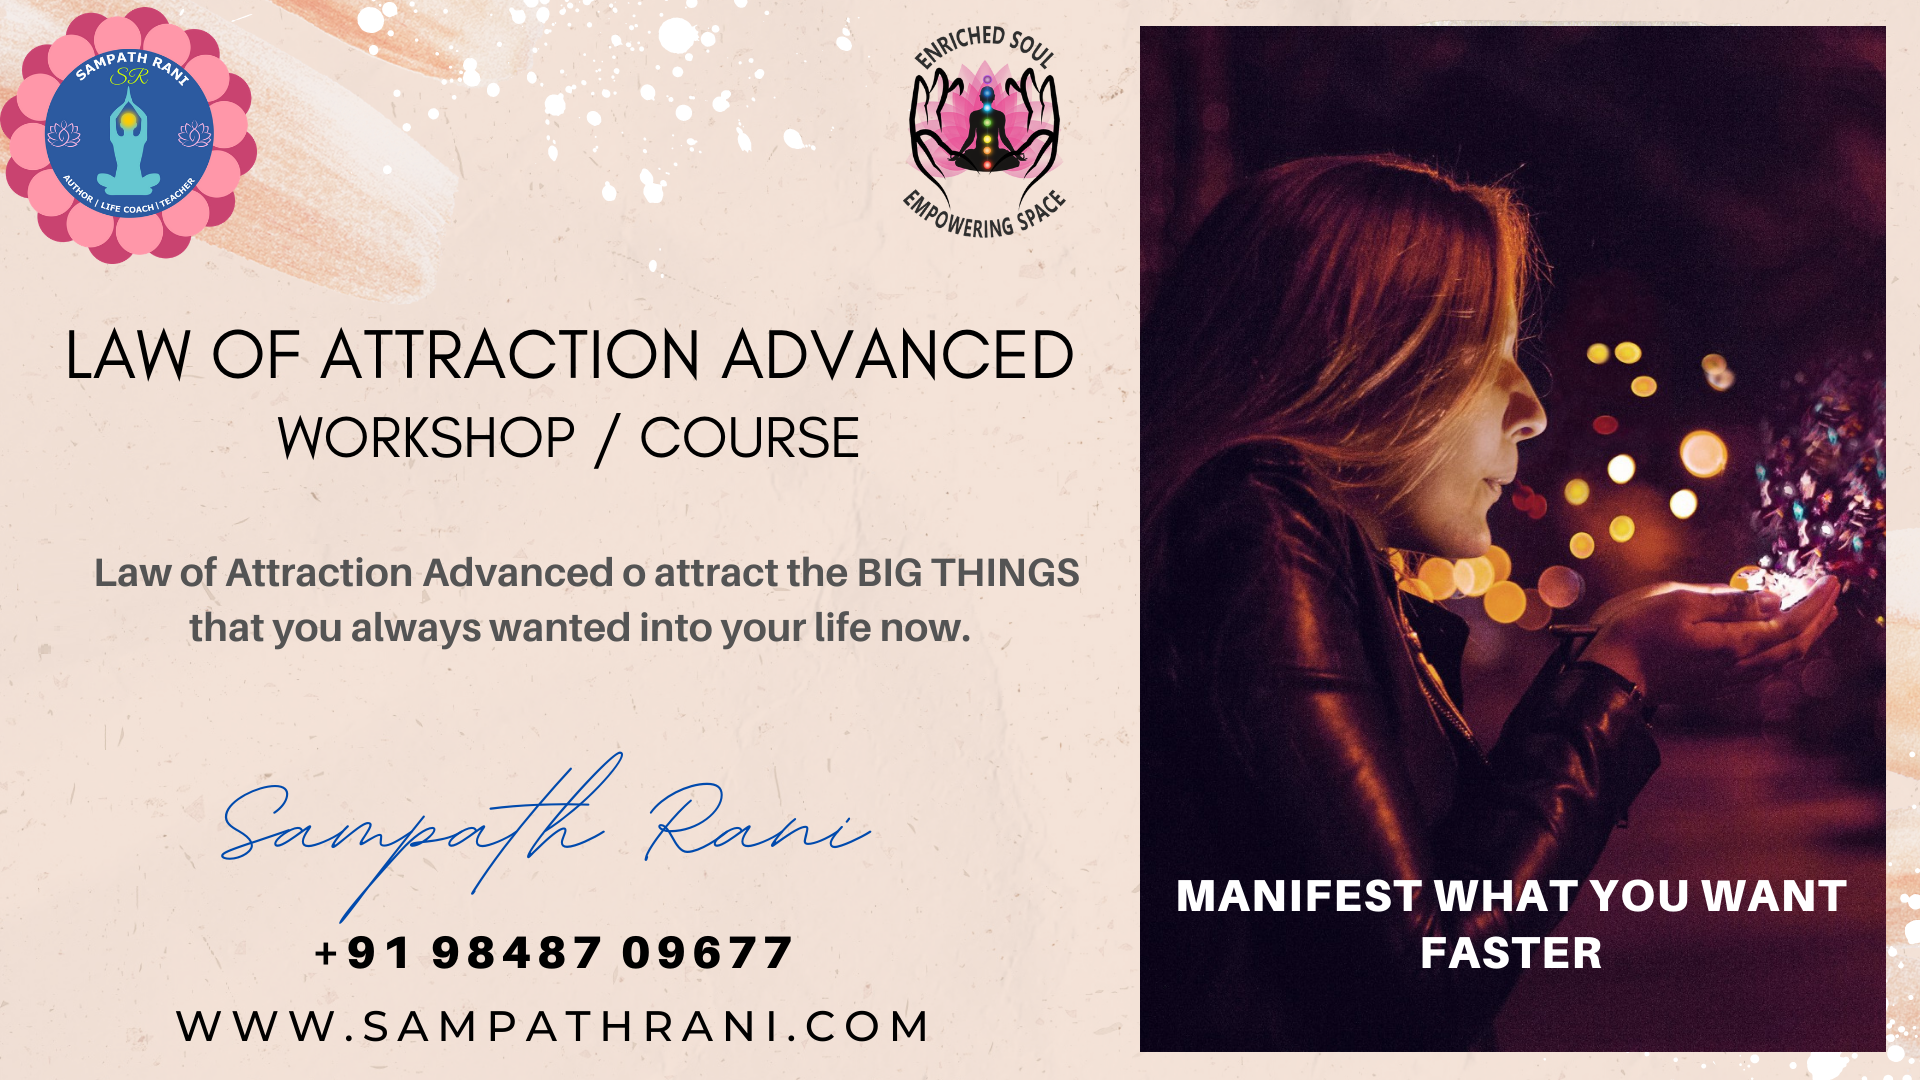 Law of Attraction Advanced Workshop, Course - by Sampath Rani - Nizamabad